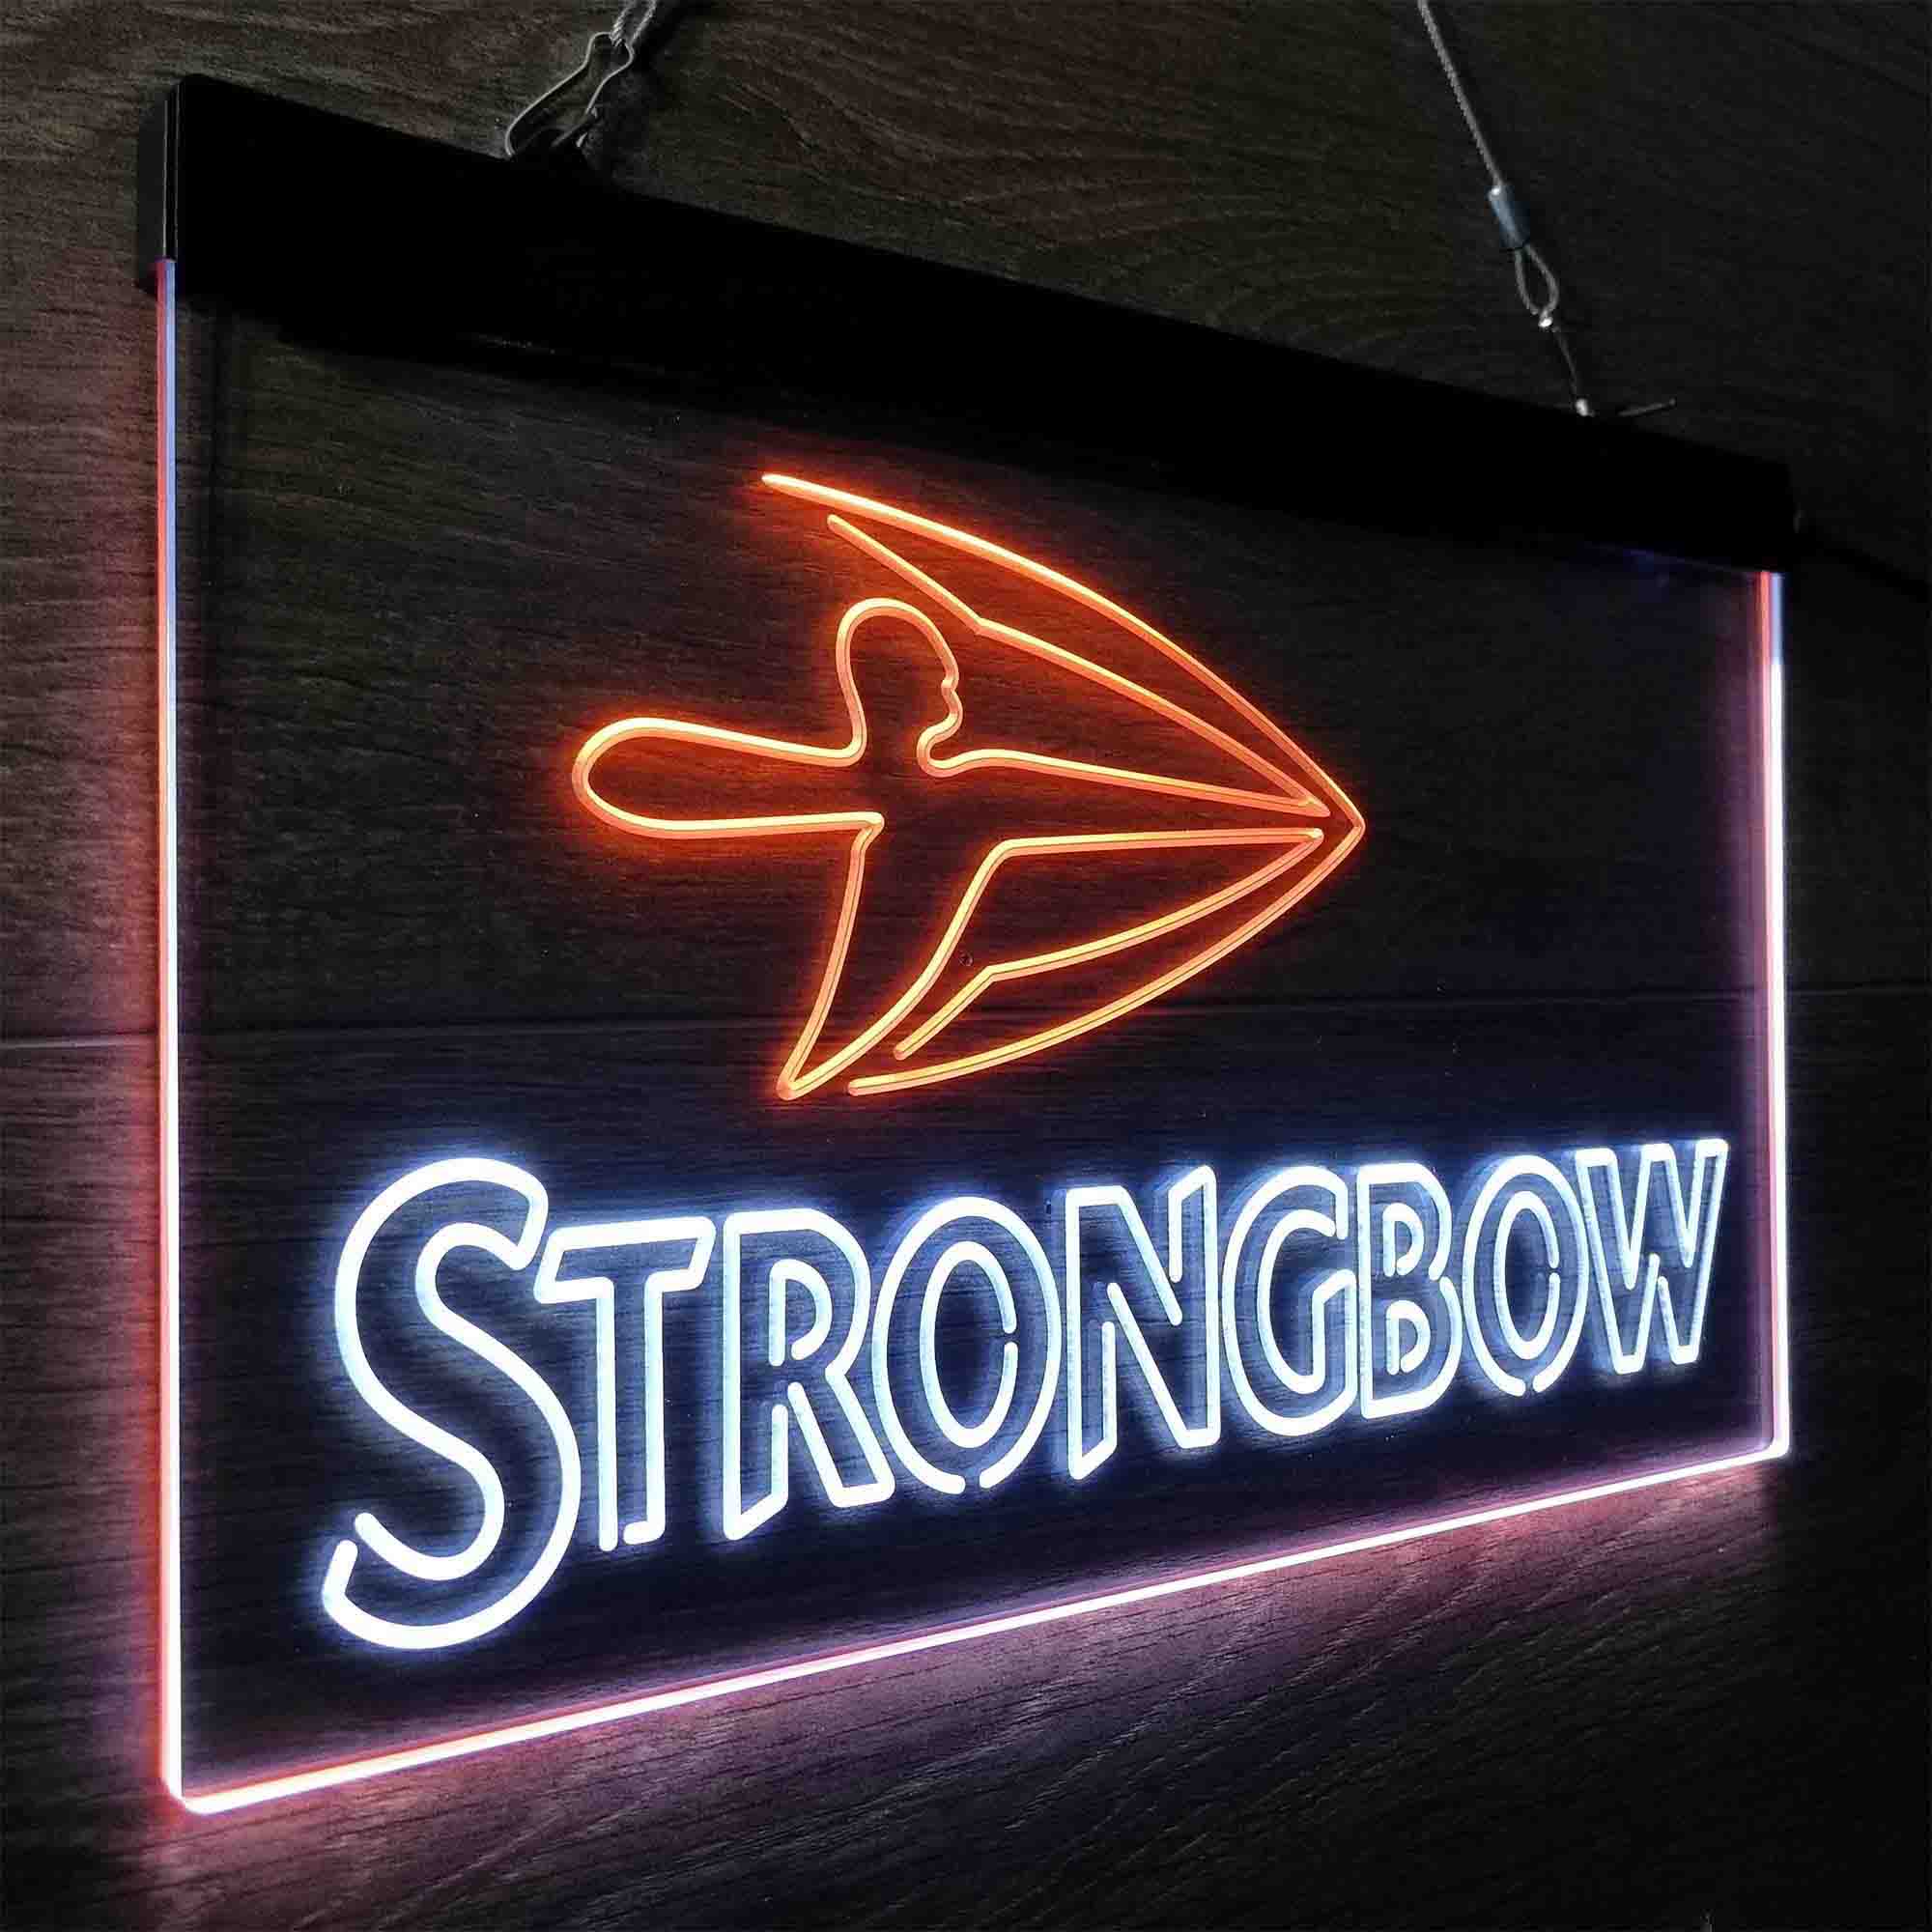 Strongbow Beer Neon-Like LED Sign